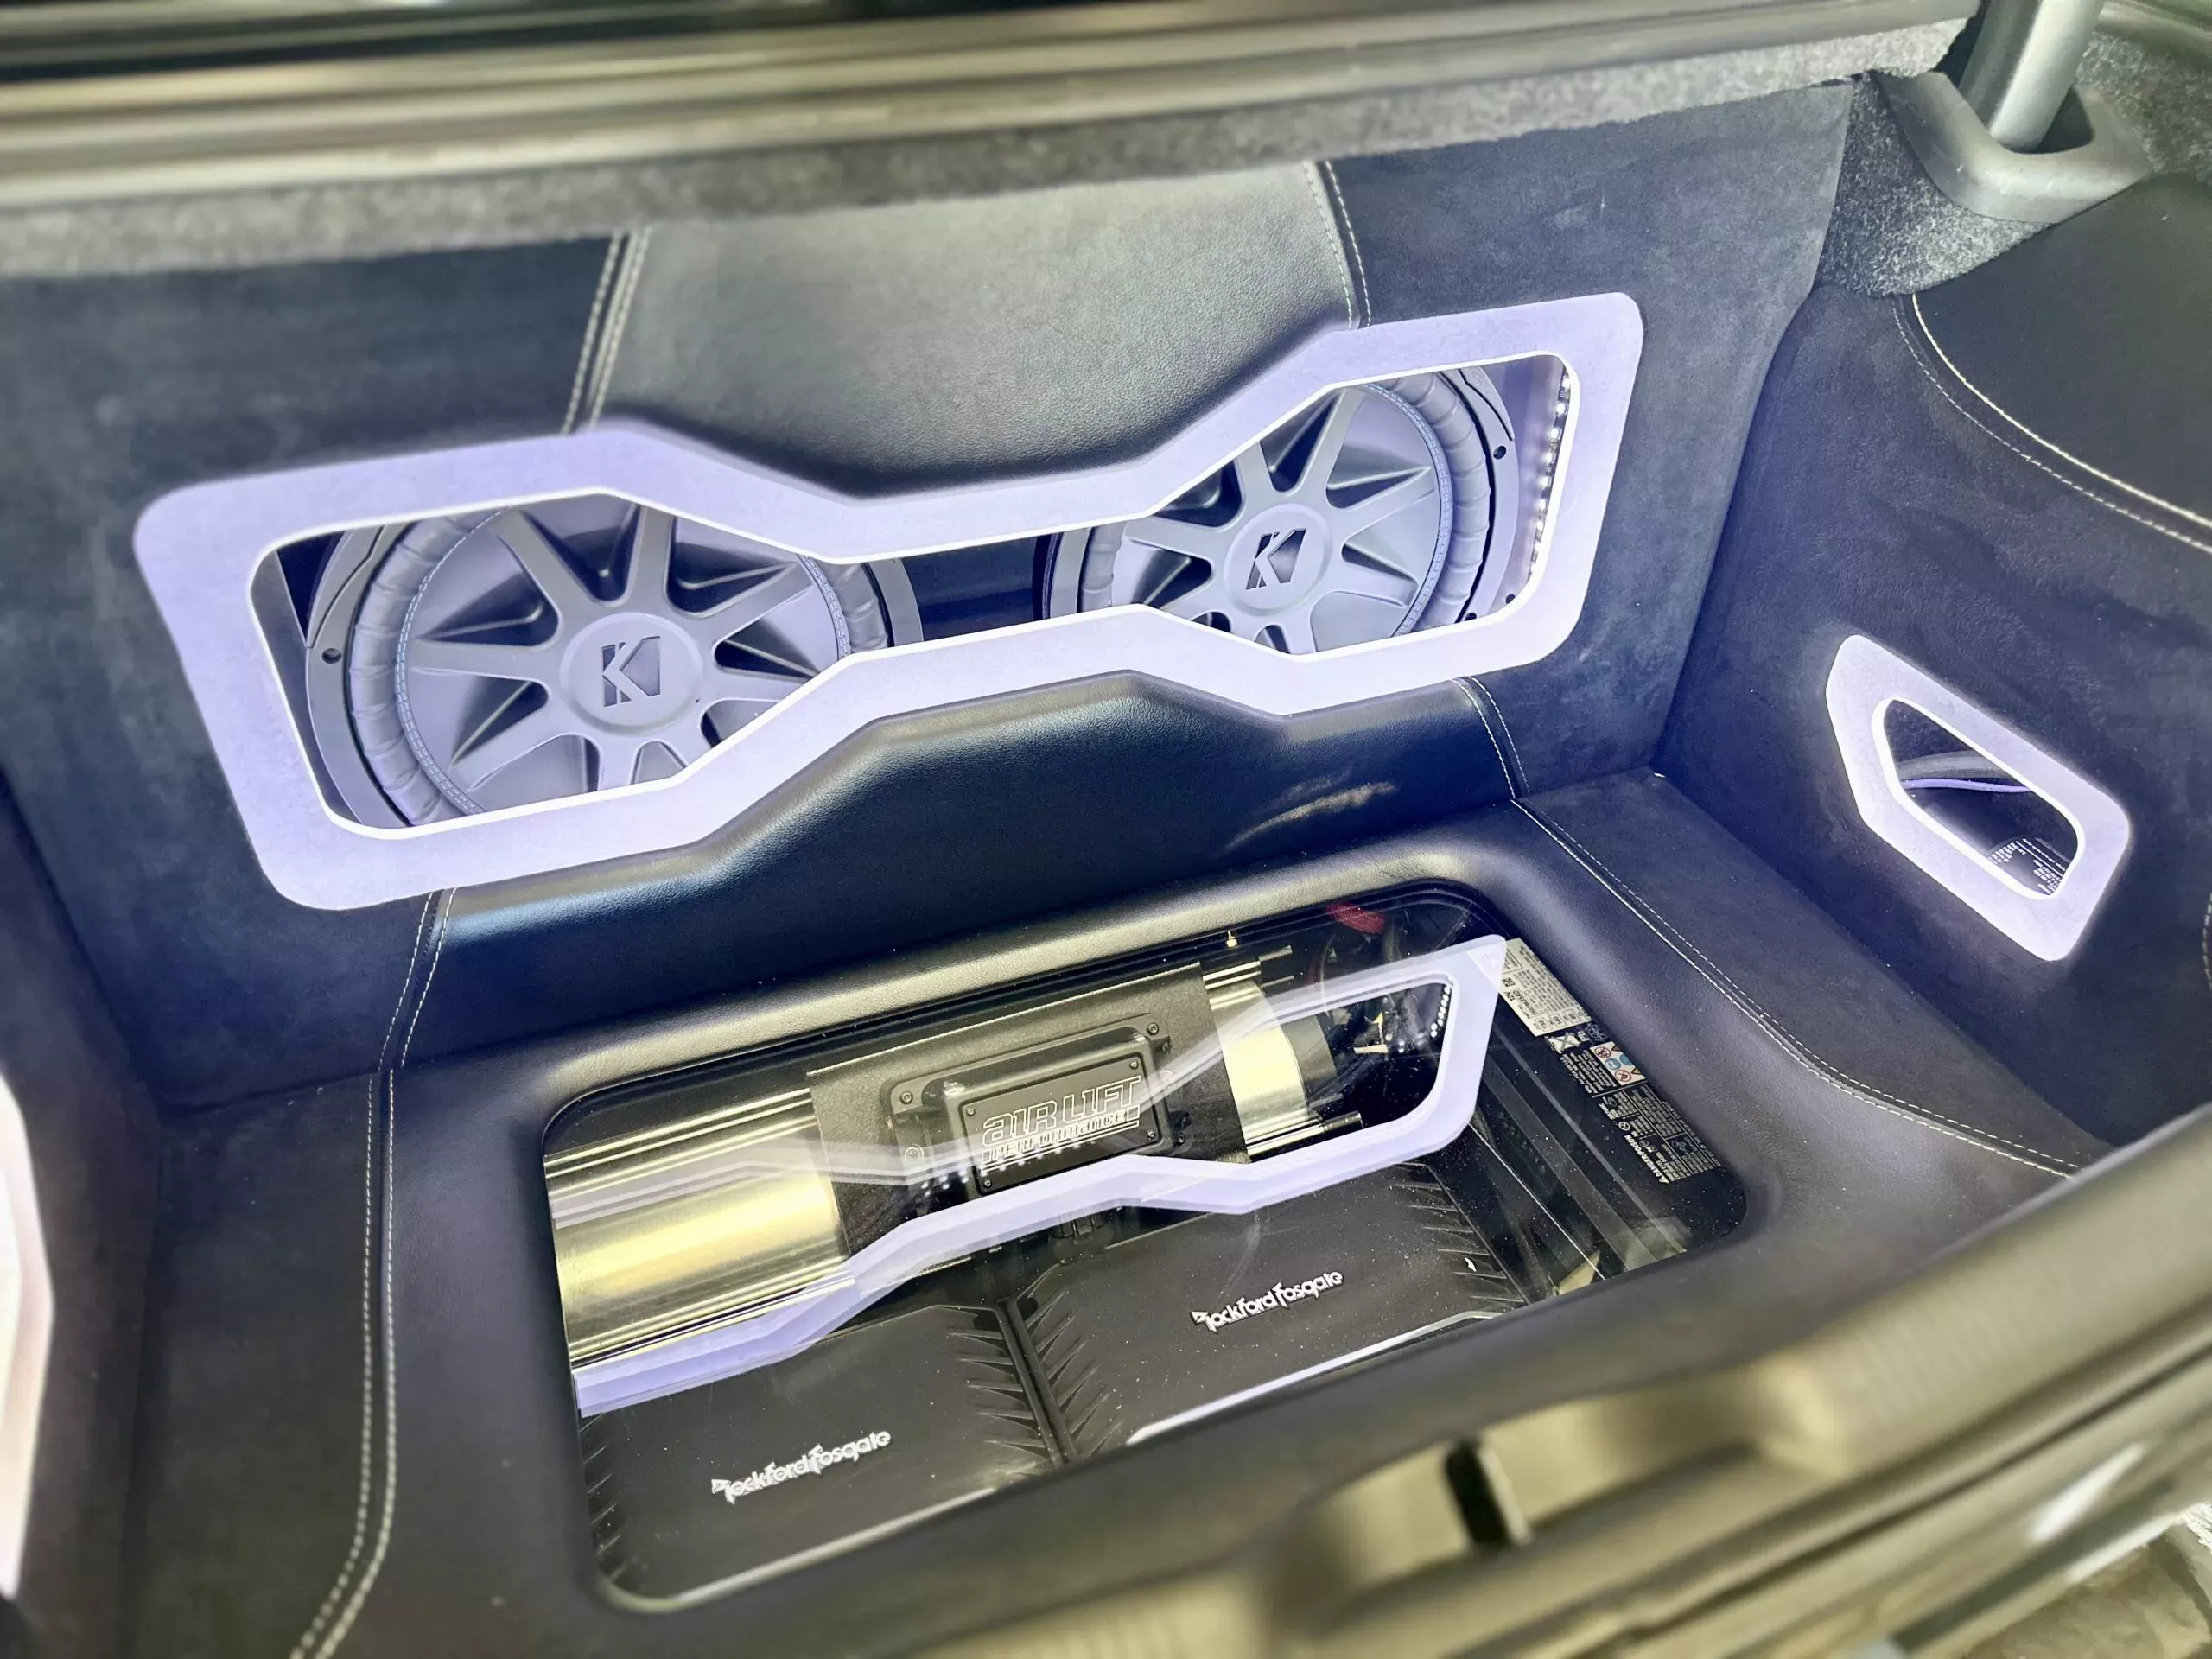 Custom car audio system with acrylic and leather inside the trunk of a car